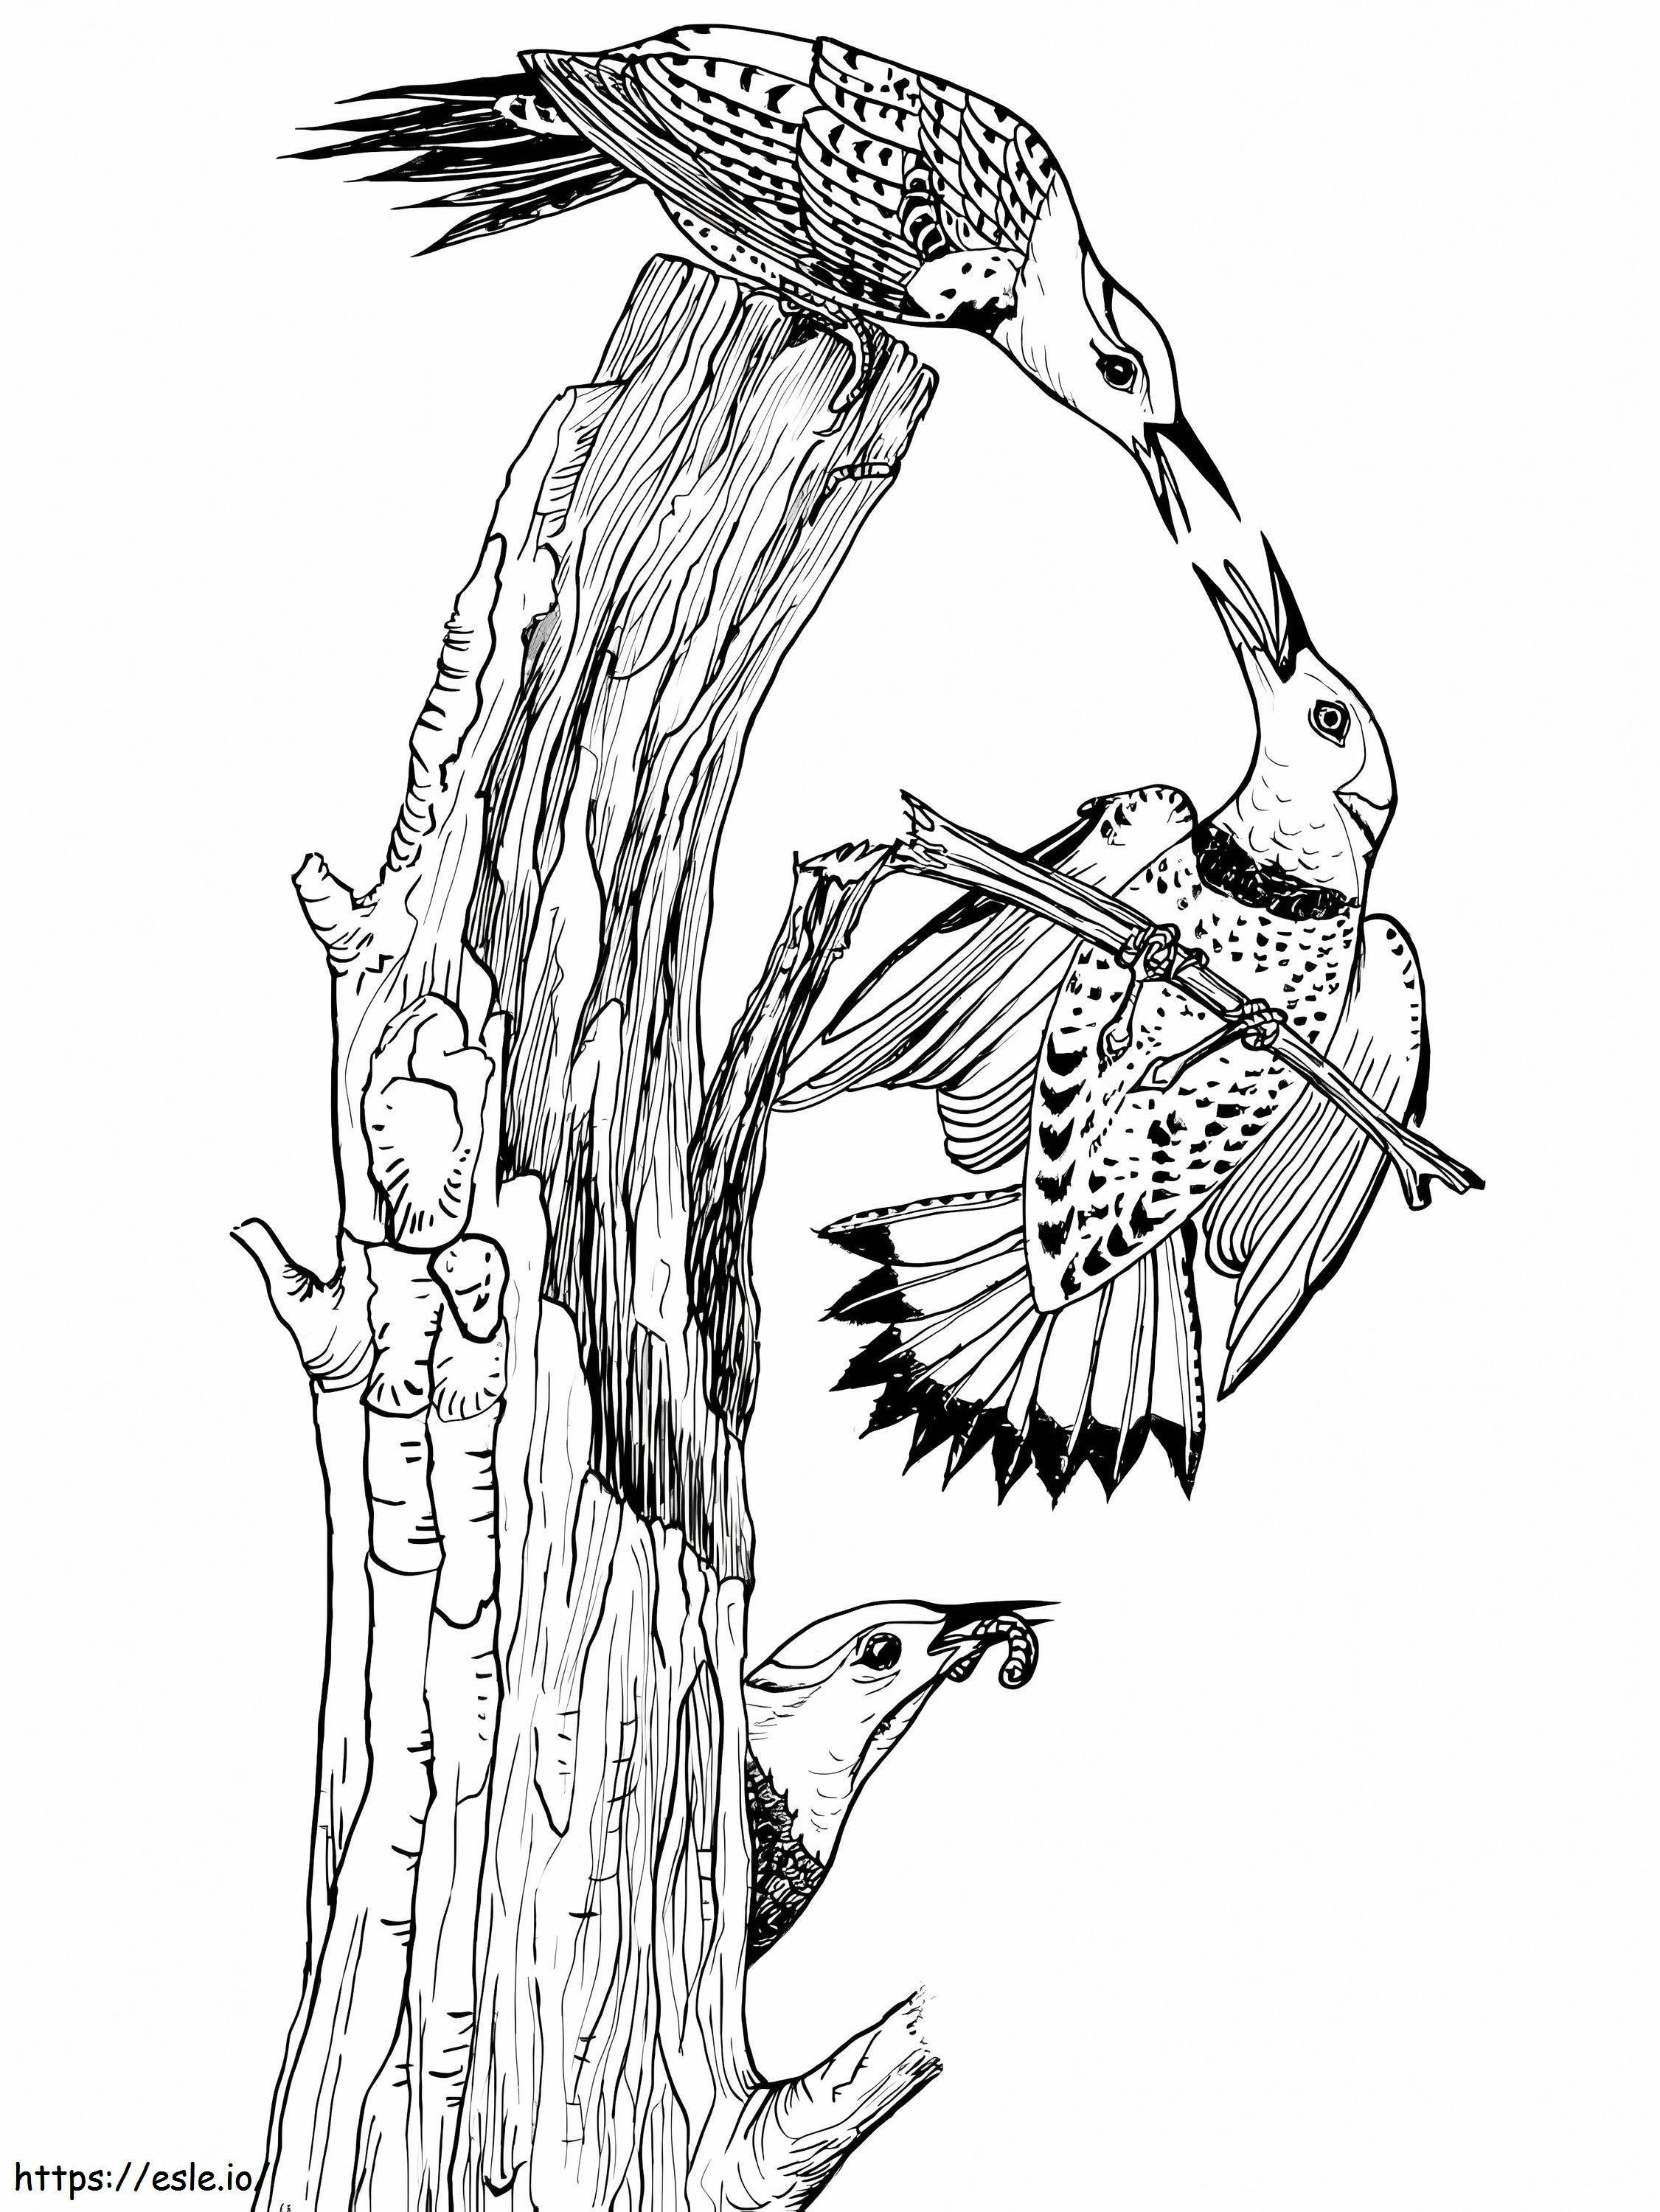 Northern Yellow Woodpecker coloring page